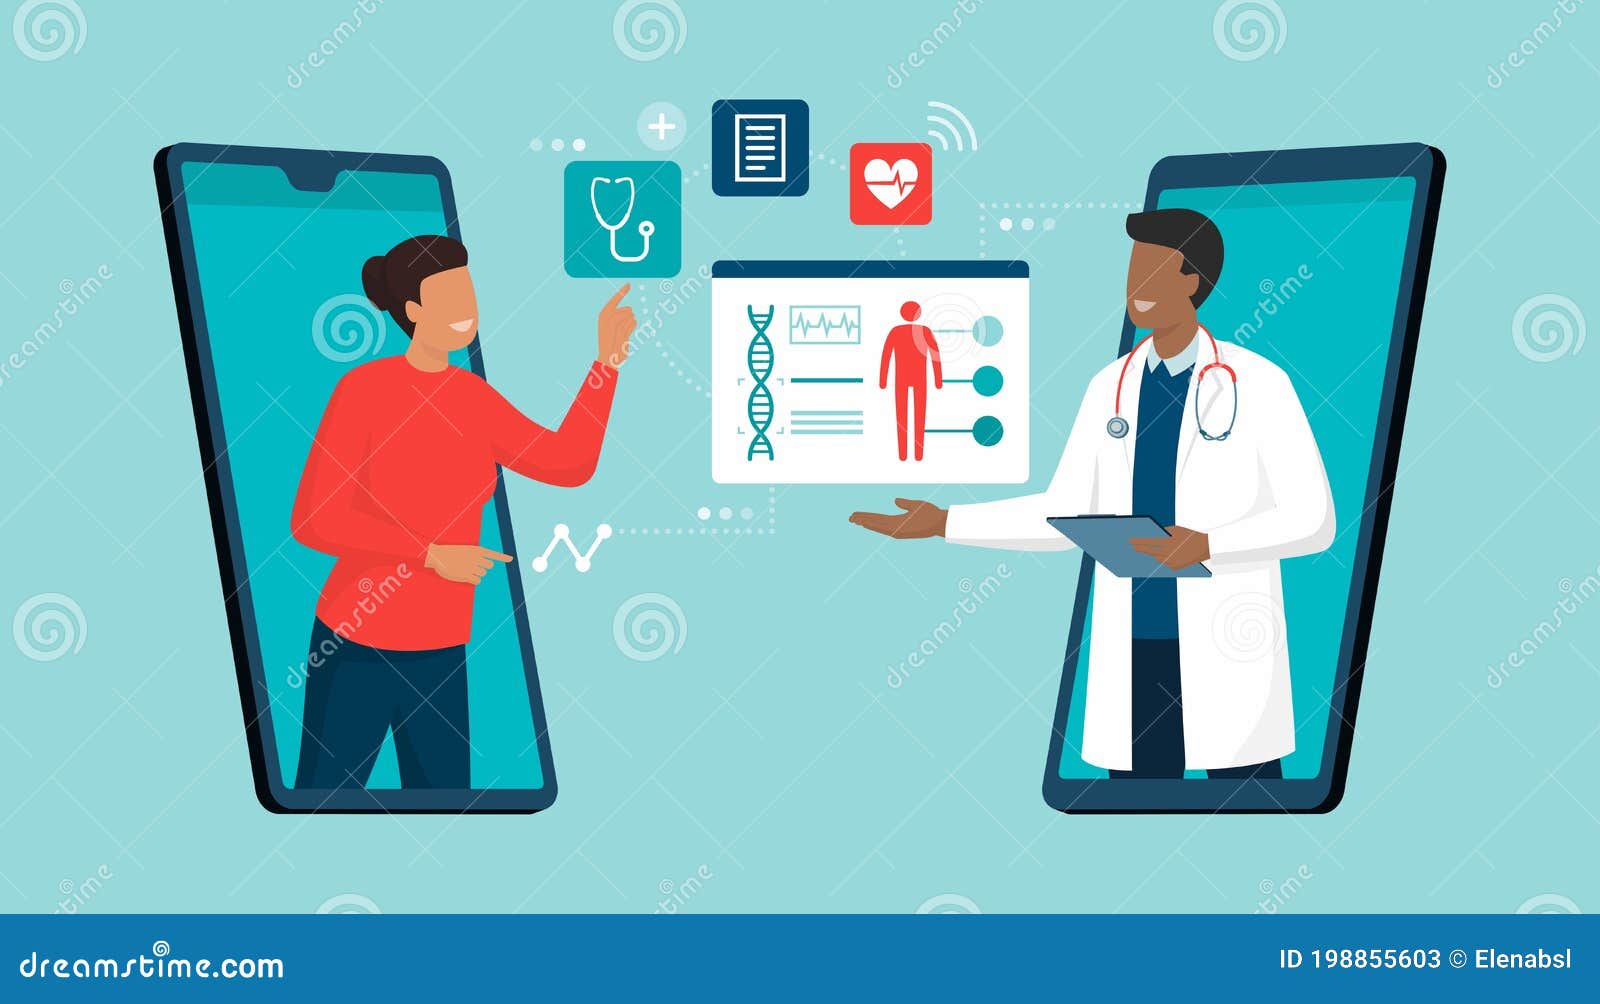 online doctor and telemedicine